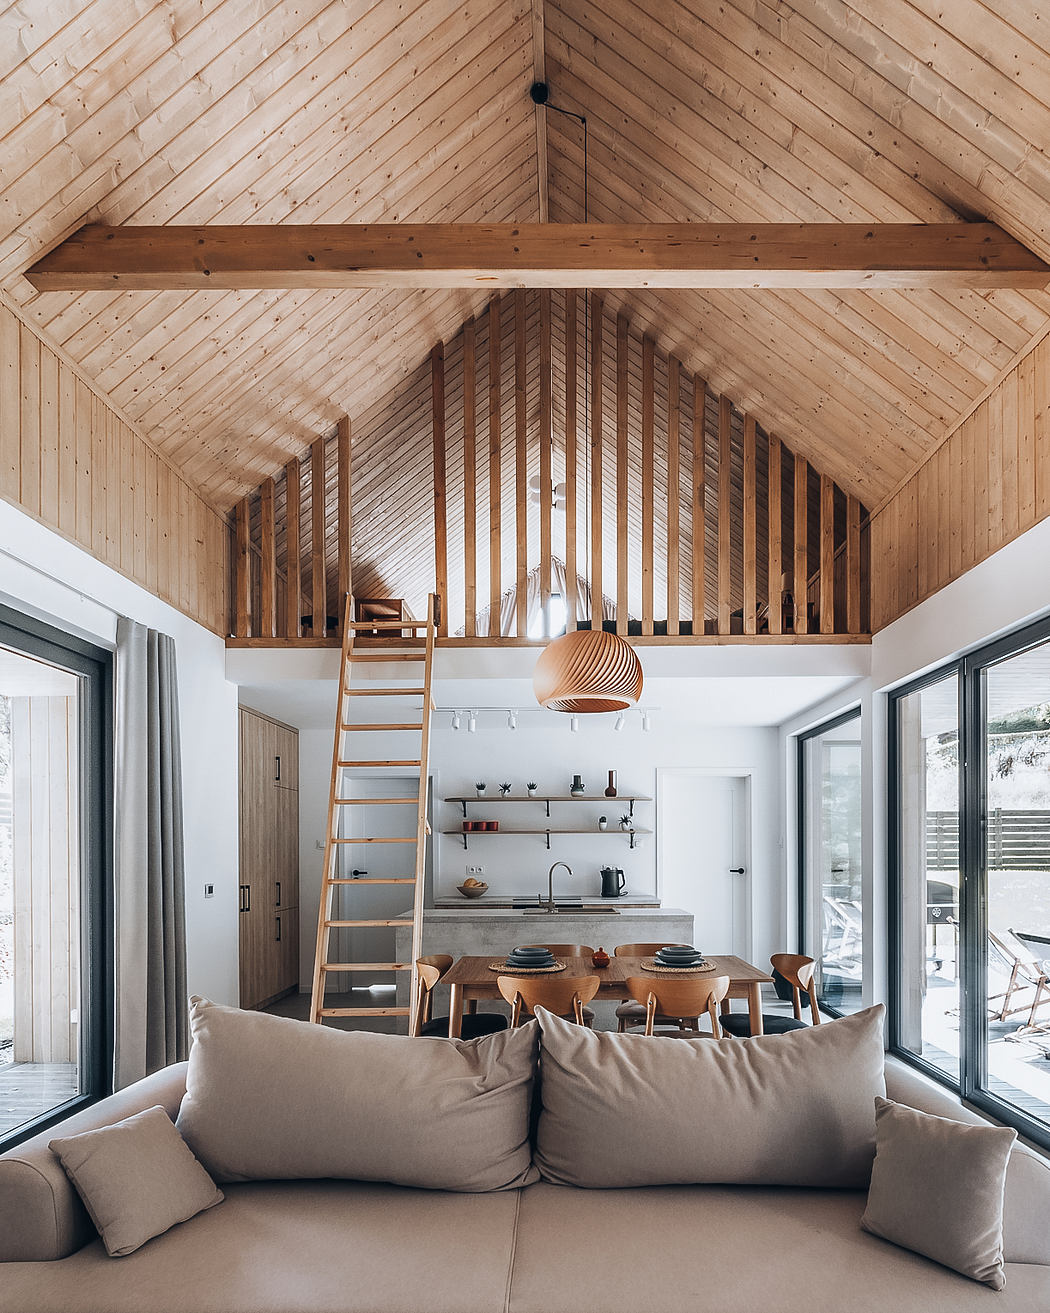 A cozy, modern cabin interior with a vaulted wooden ceiling, ladder, and open-concept living space.